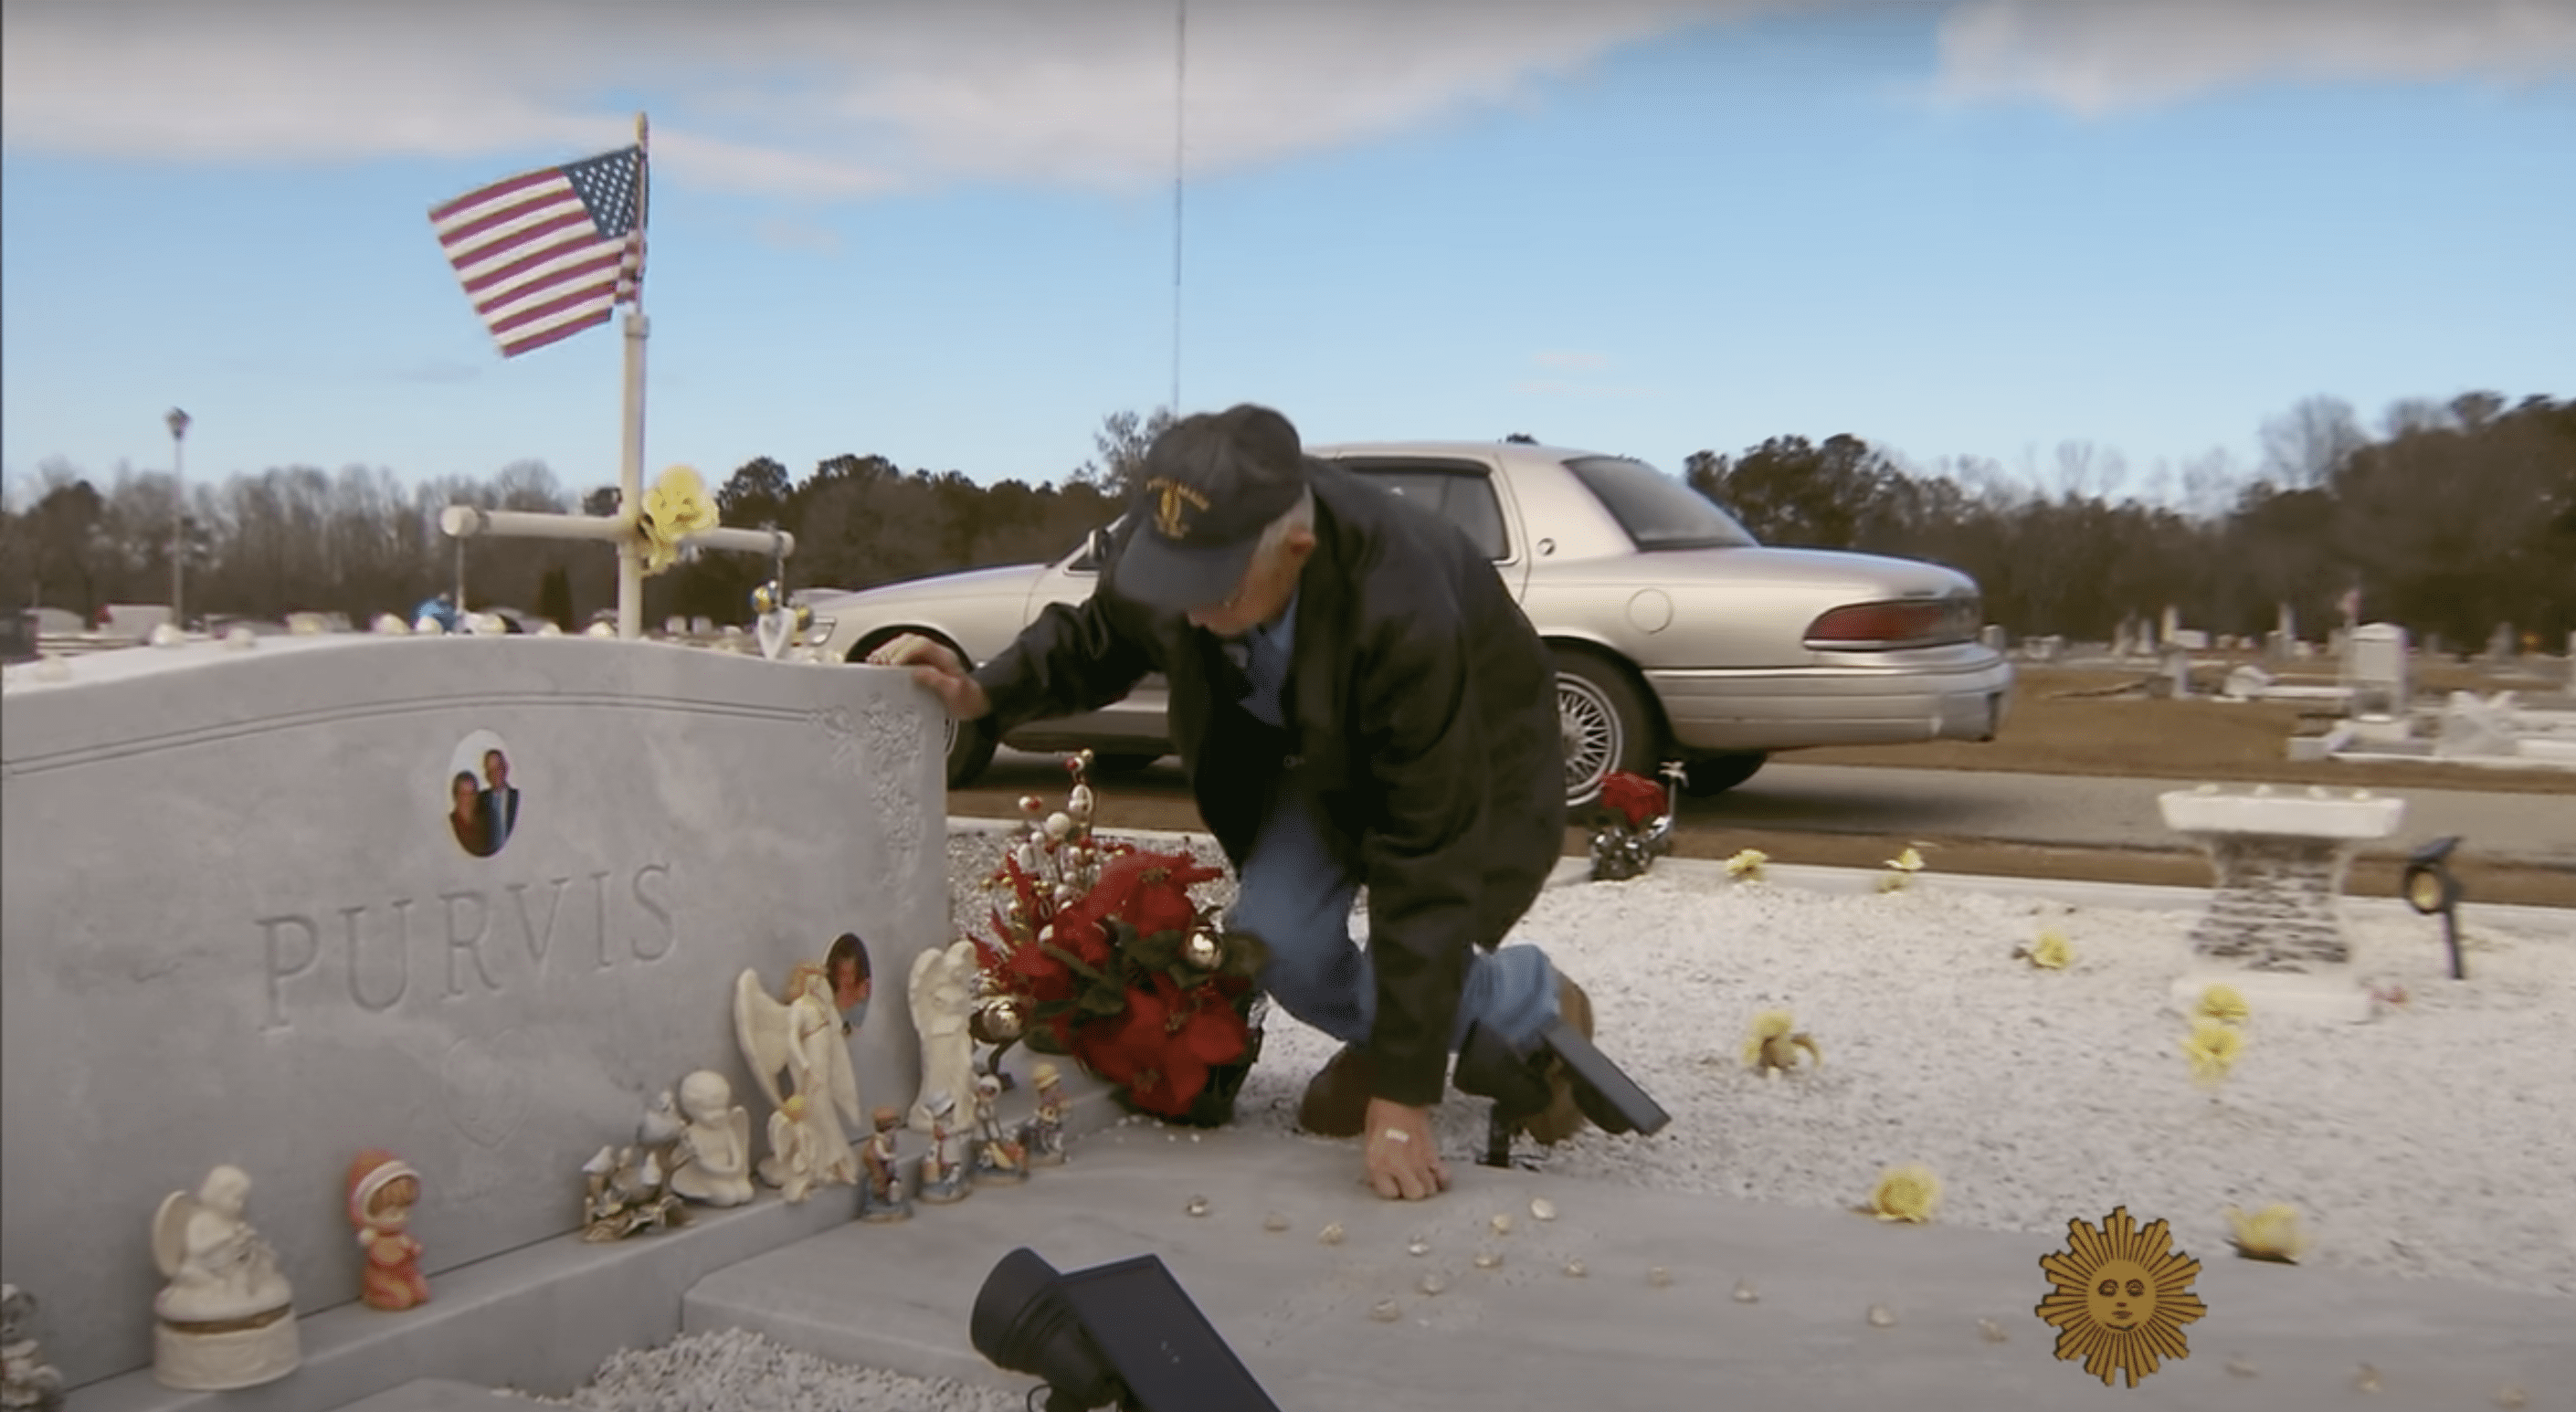 93-year-old retired Mechanic, Clarence Purvis at the cemetery | Source: YouTube/CBS Sunday Morning